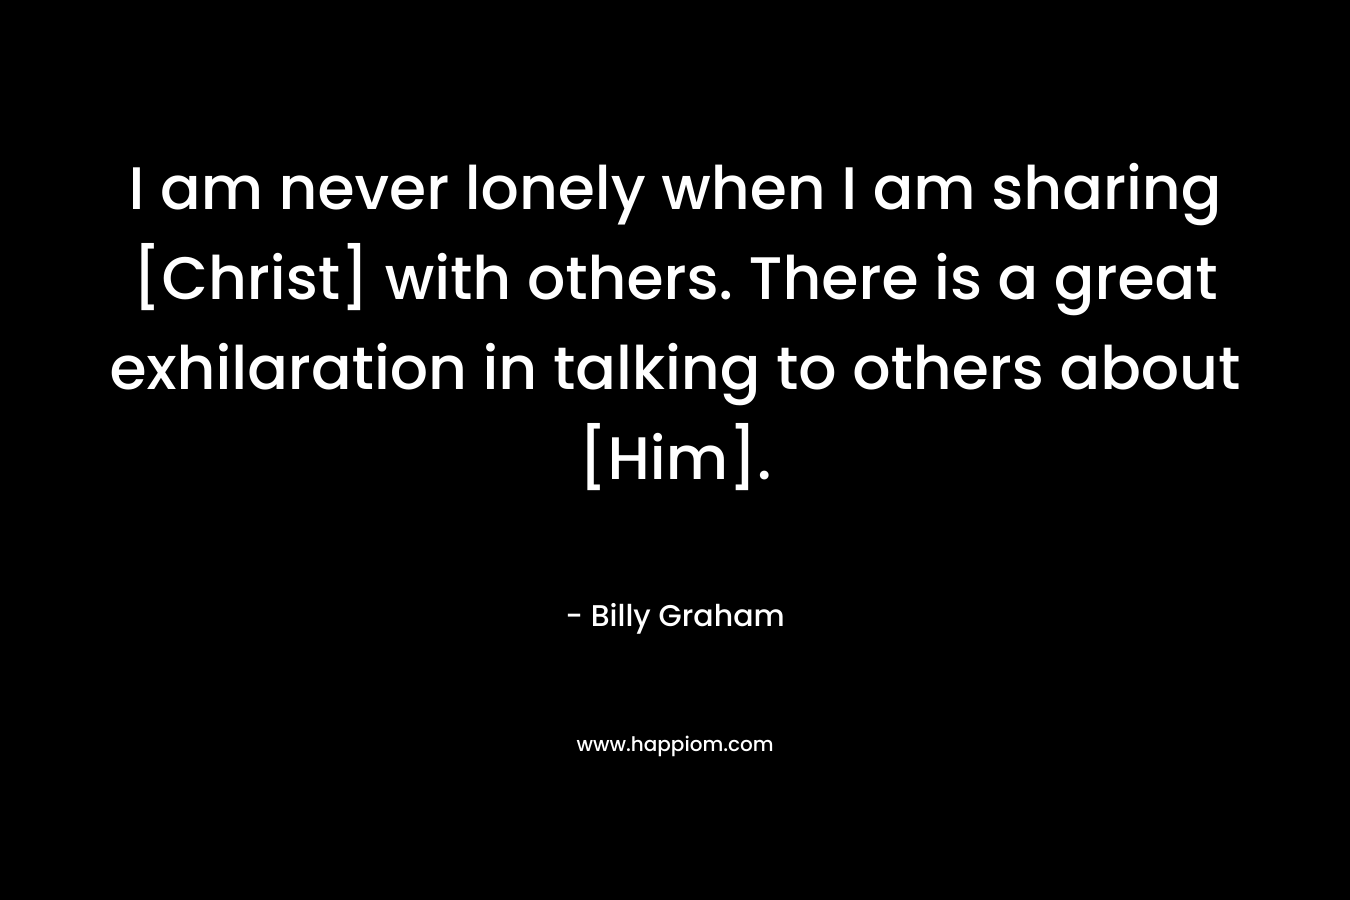 I am never lonely when I am sharing [Christ] with others. There is a great exhilaration in talking to others about [Him].